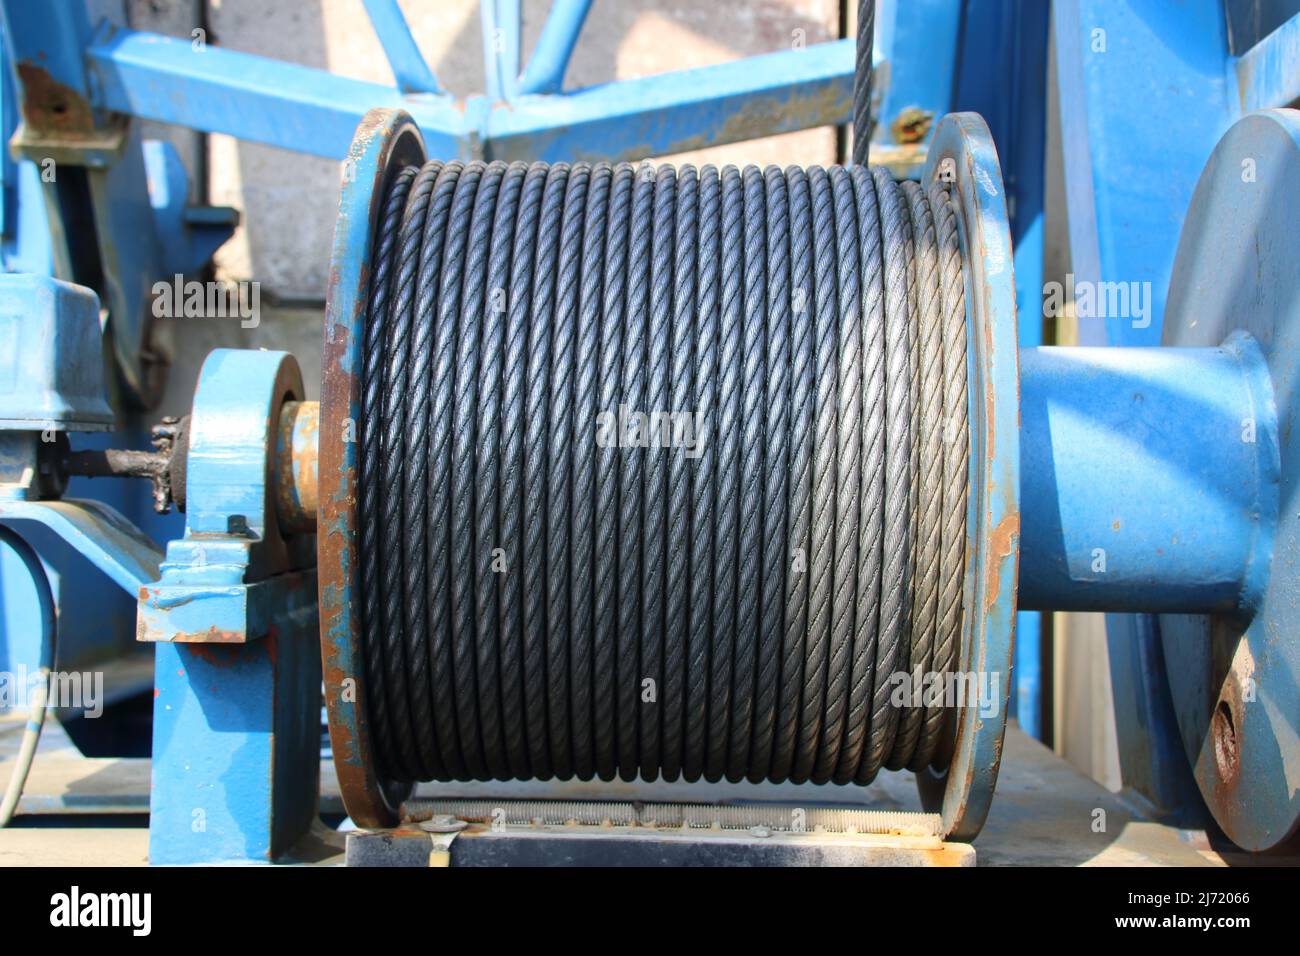 Winch with a wire rope on a crane Stock Photo